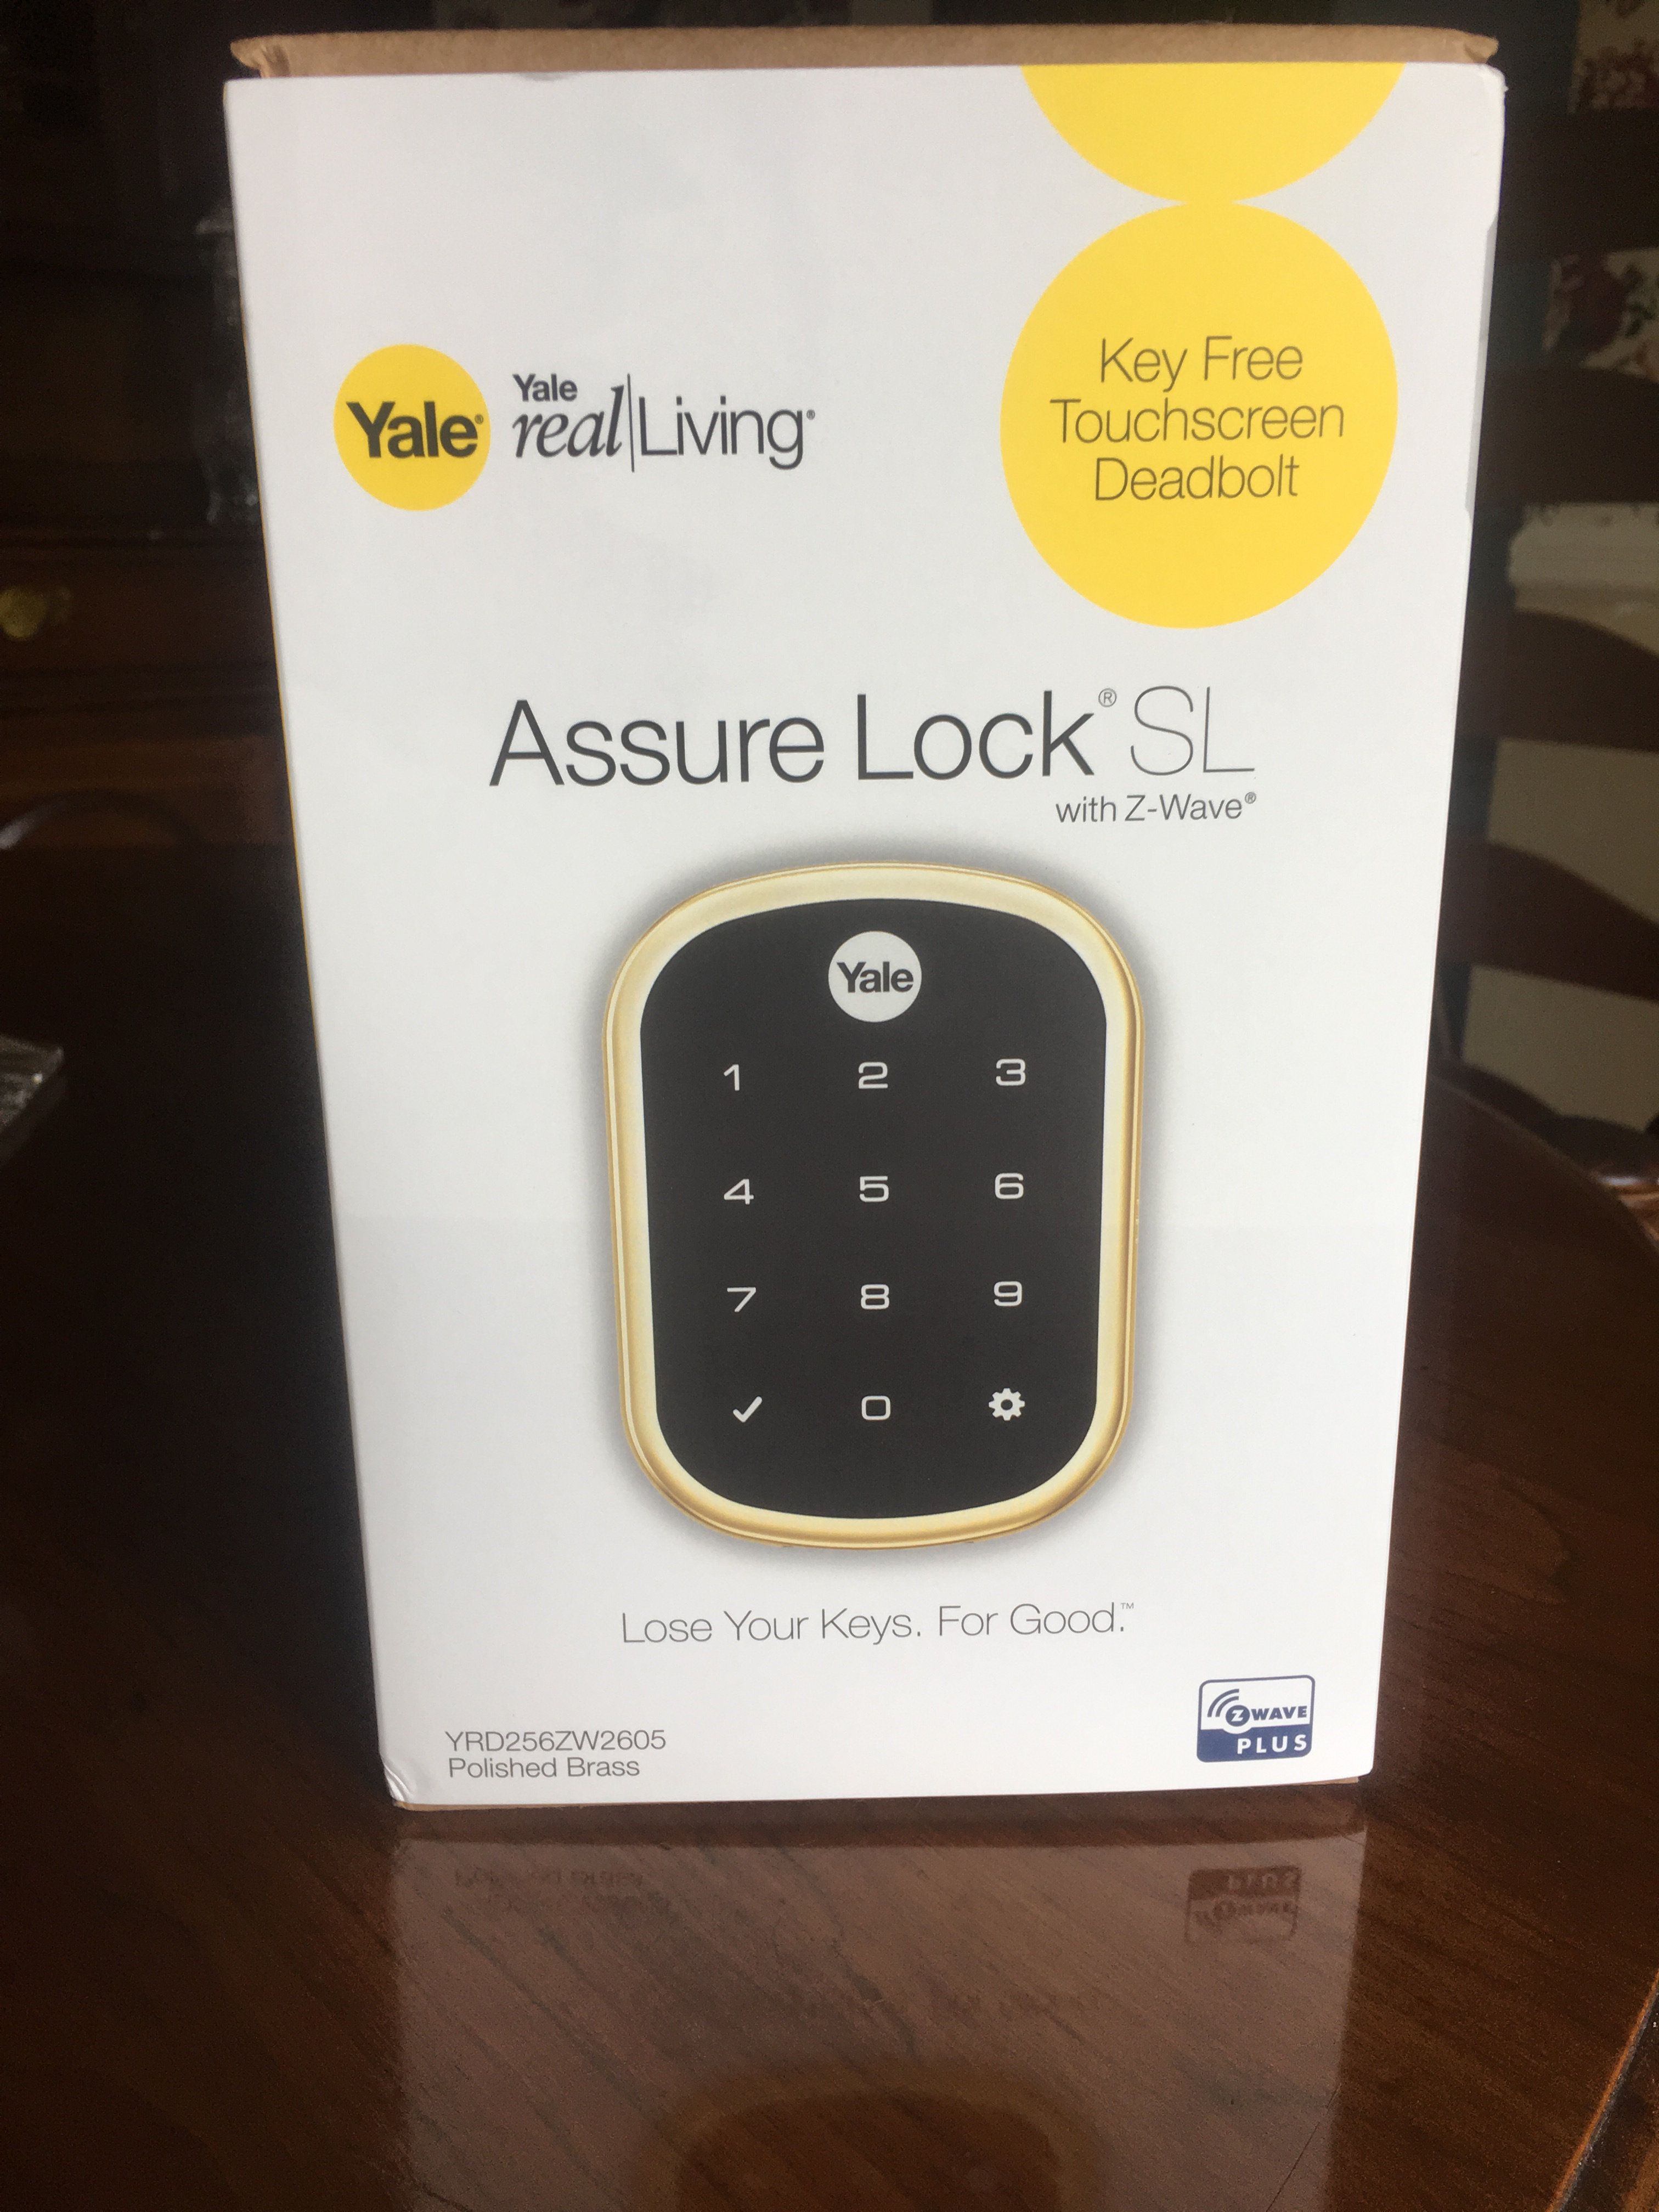 I love the Nuki smart lock and with this Prime Day deal, you will too